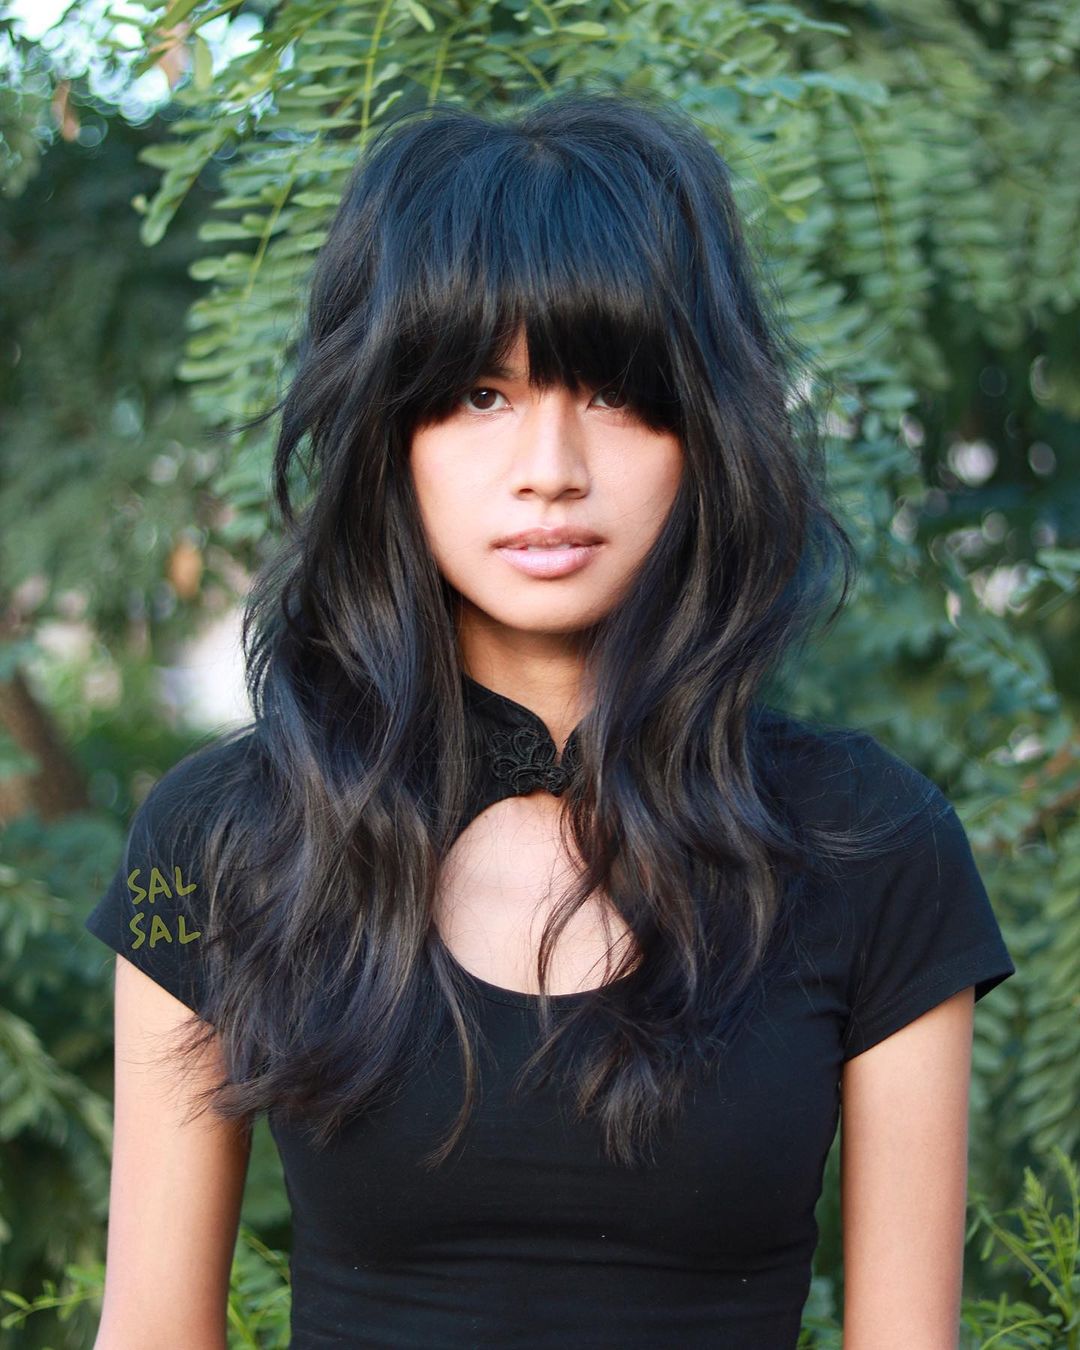 Black hair: 35 most elegant and mysterious options